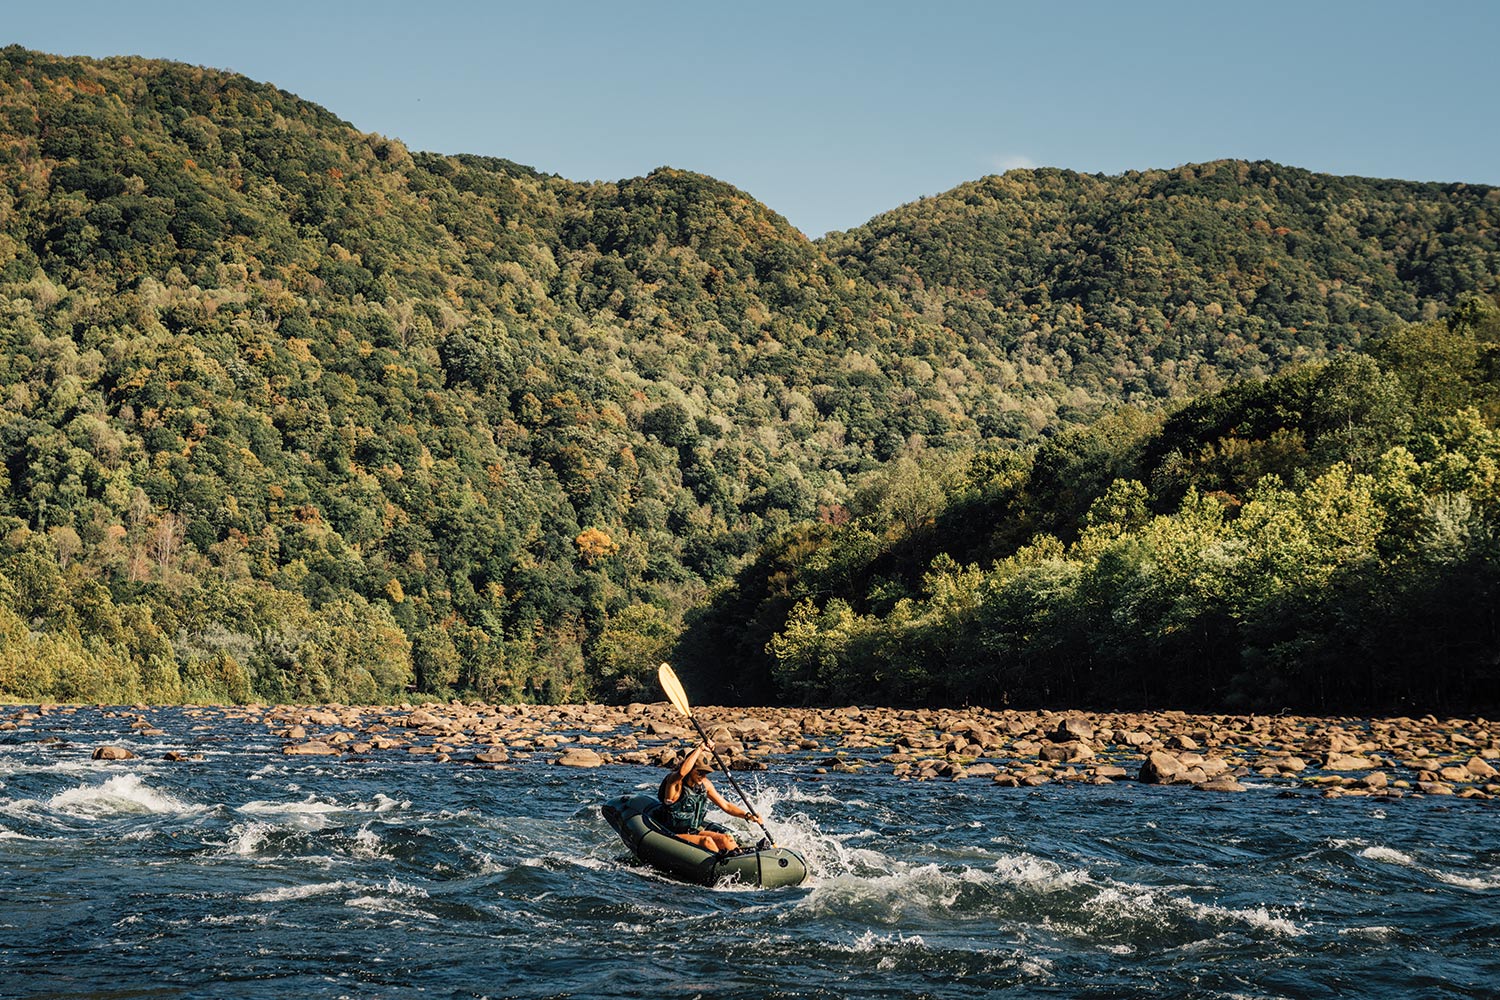 paddler in small packraft on rocky, swiftly moving river water with shrub-covered hills behind